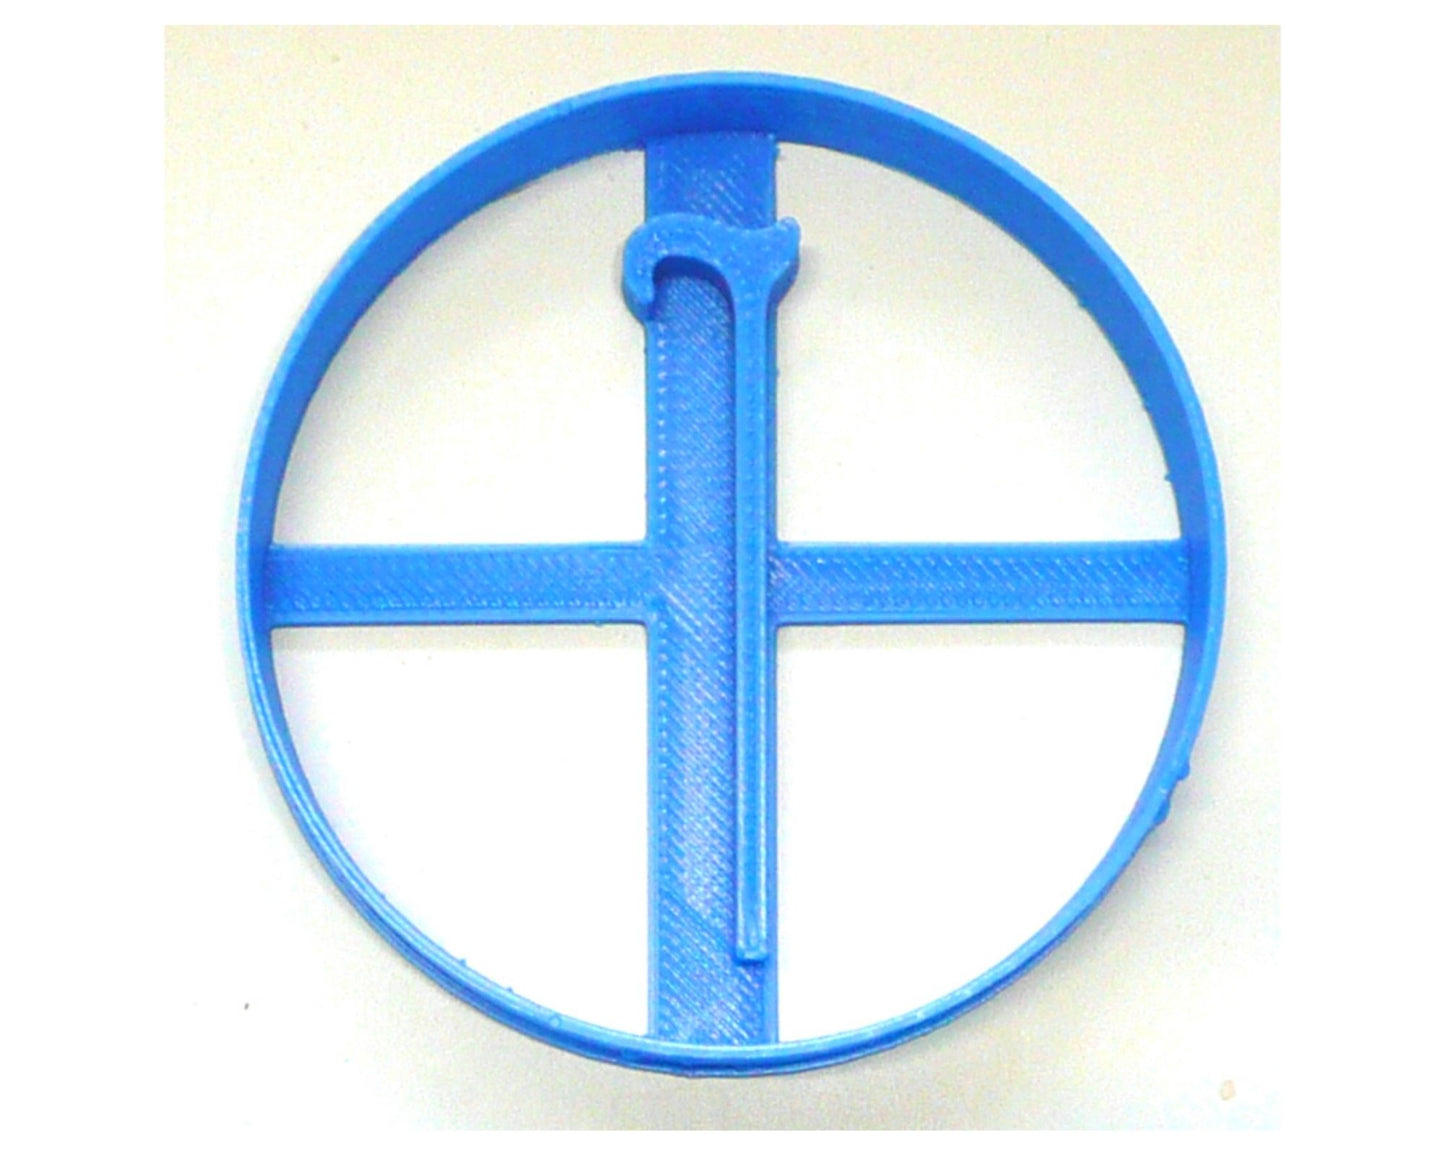 Cane Medical Device Healing Rehabilitation Healthcare Cookie Cutter USA PR3790